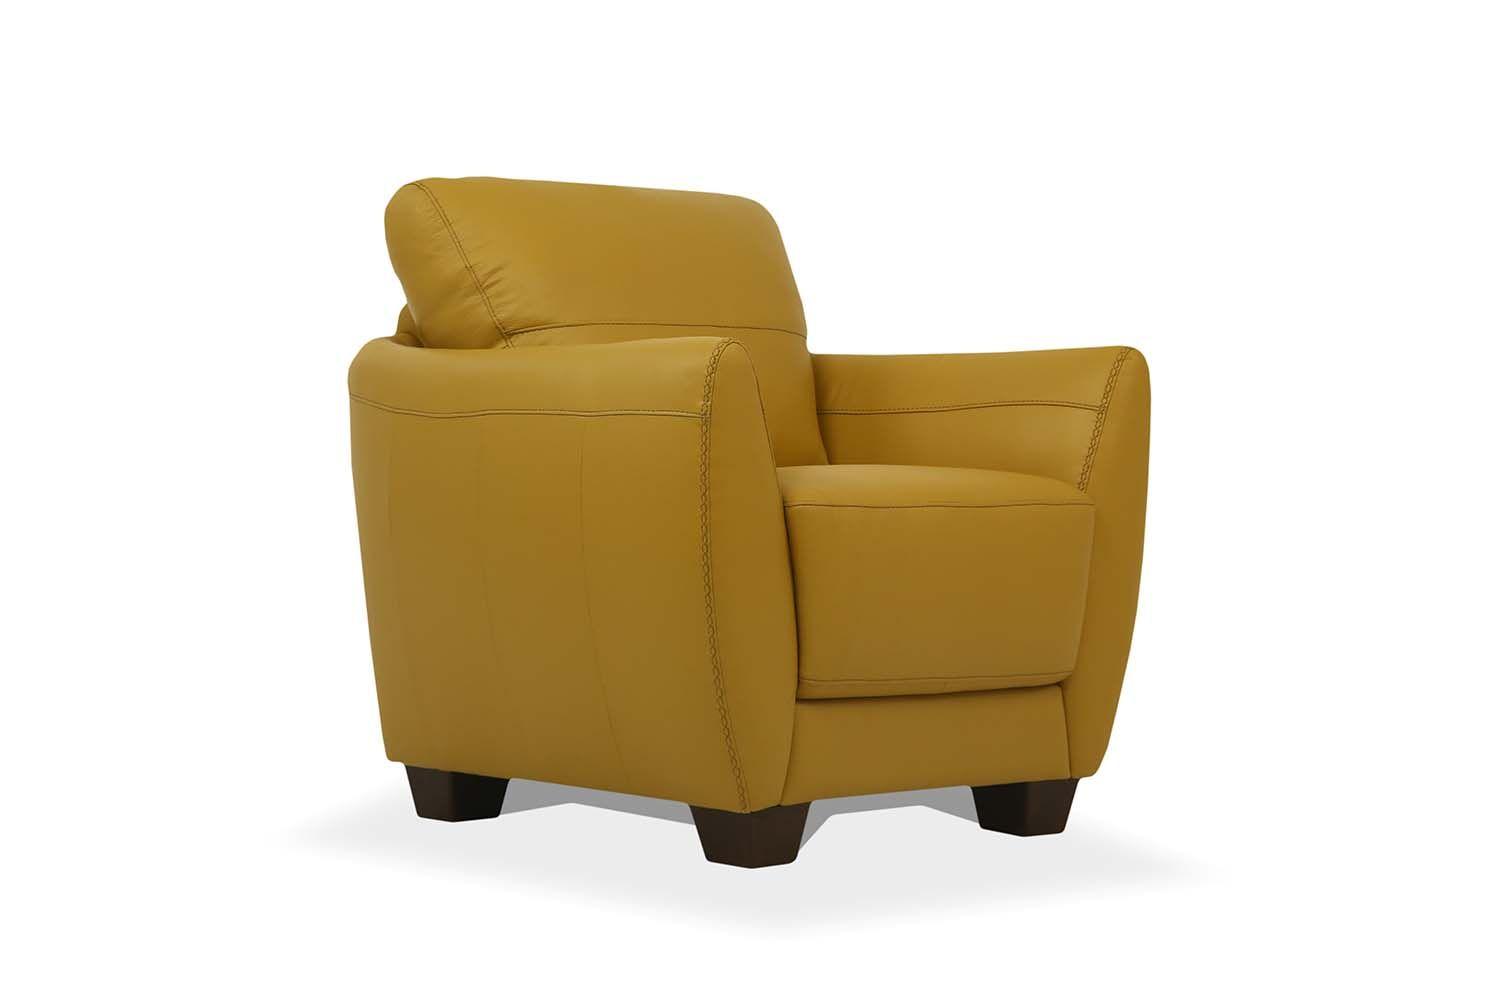 Modern, Transitional Chair Valeria 54947 in Yellow Leather